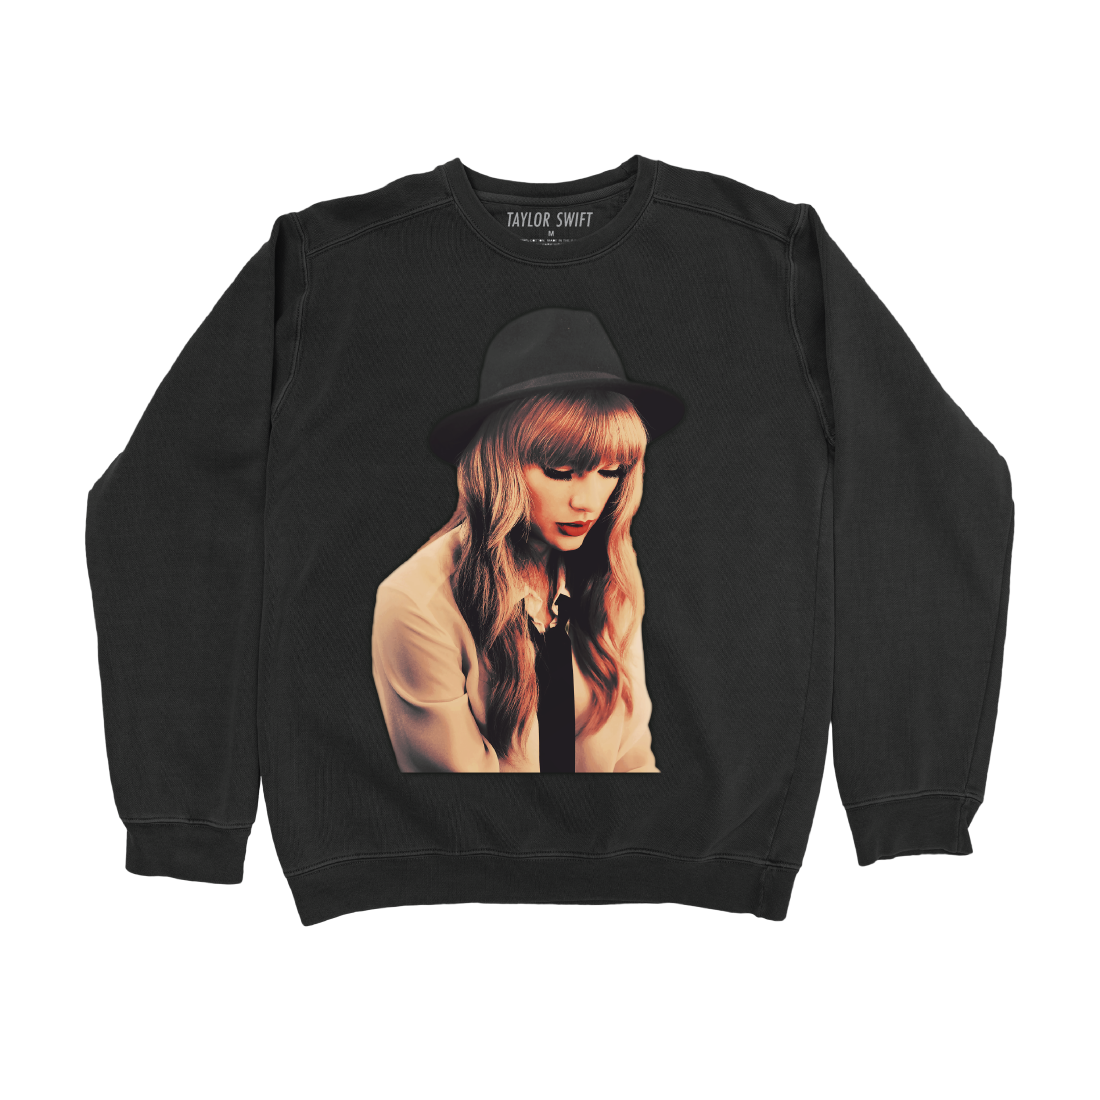 Black crewneck featuring photo of Taylor Swift printed on front.